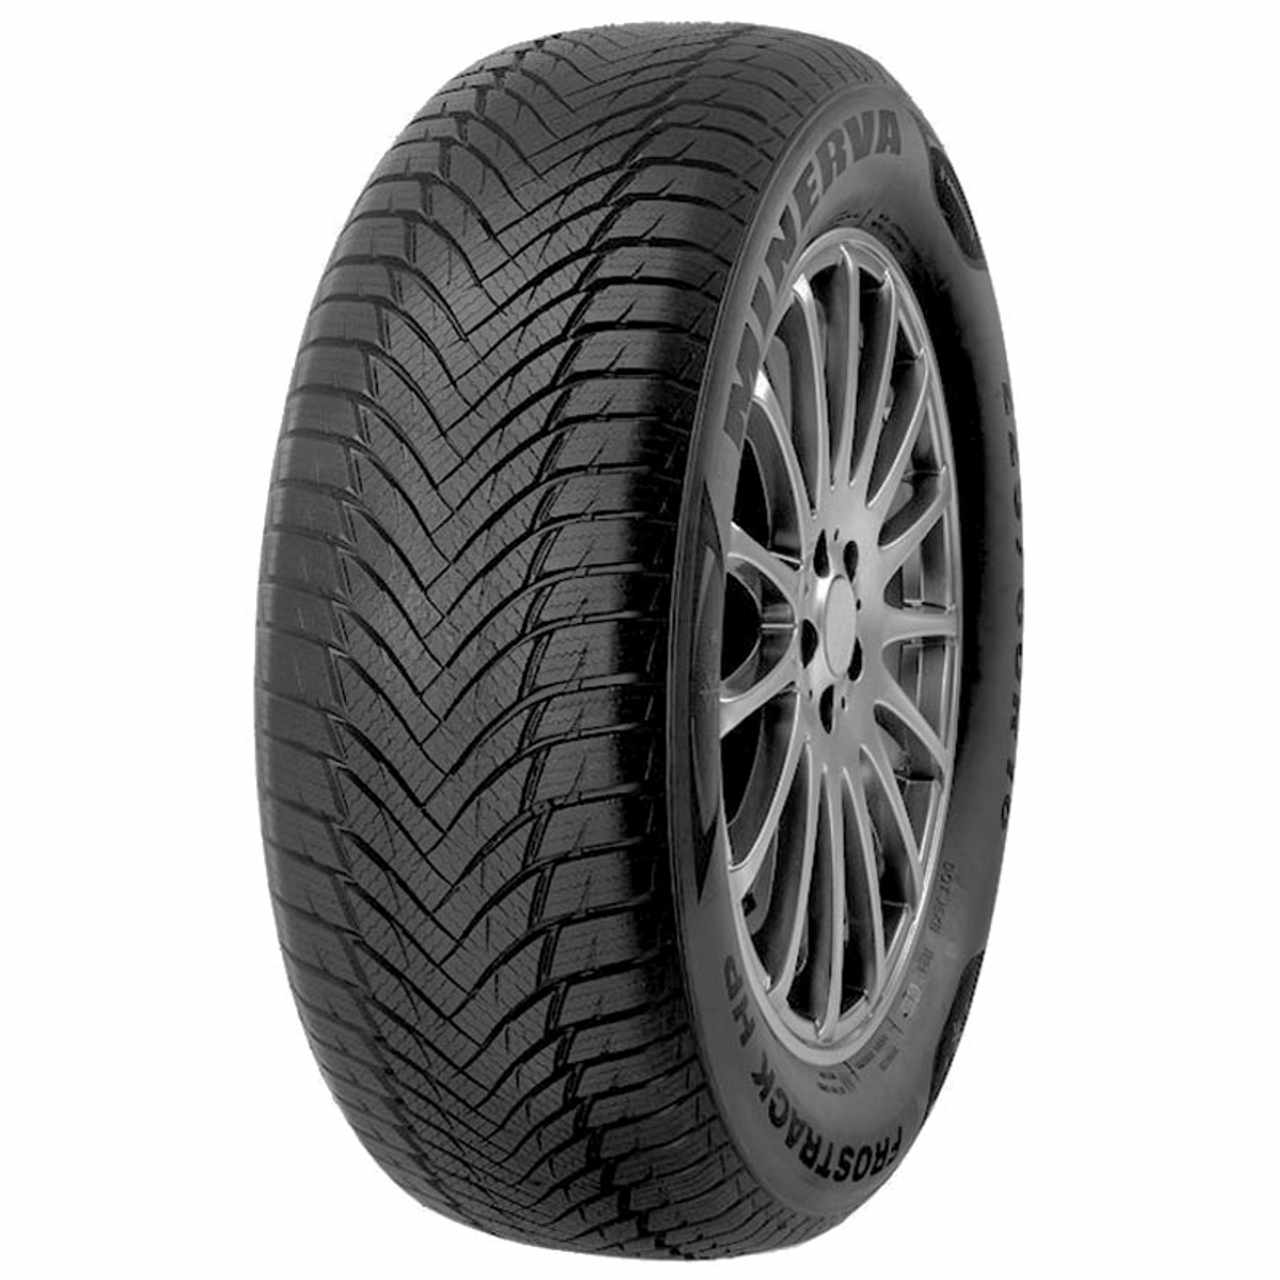 MINERVA FROSTRACK HP 185/55R15 86V BSW